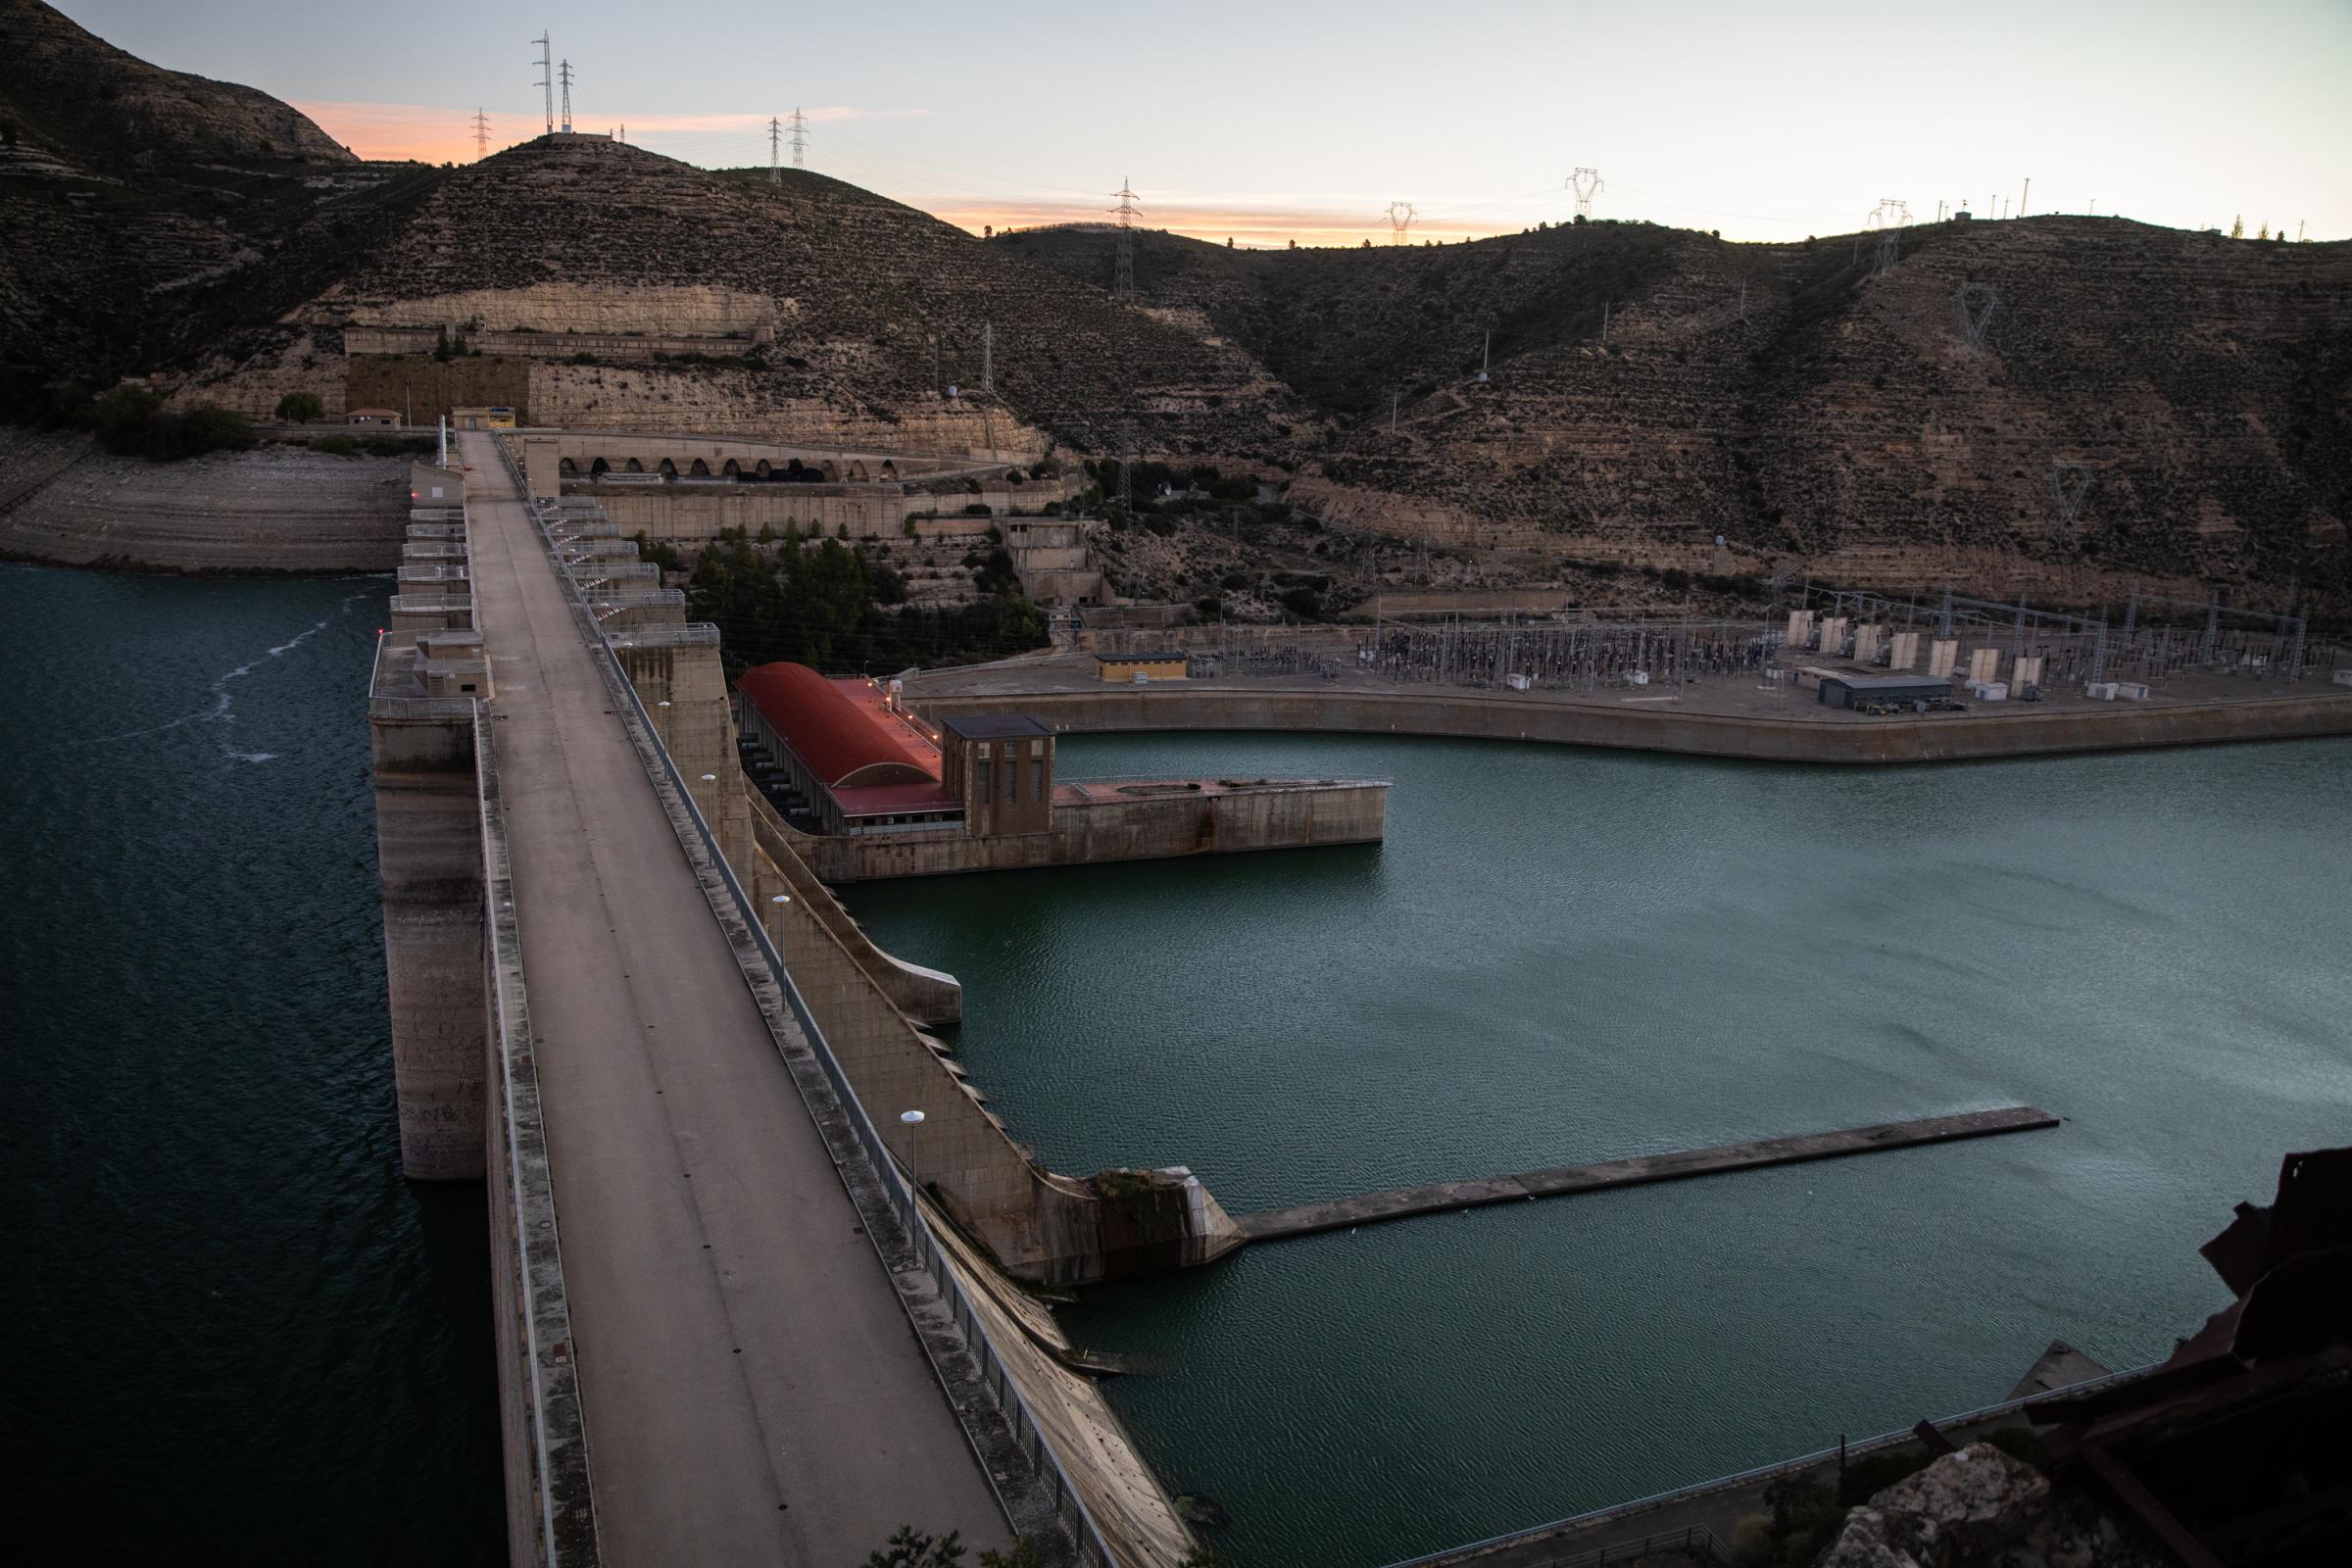 Spain's Drought Threatens Electricity Production At Mequinenza Plant - MEQUINENZA, SPAIN - NOVEMBER 05: Sunrise at the...